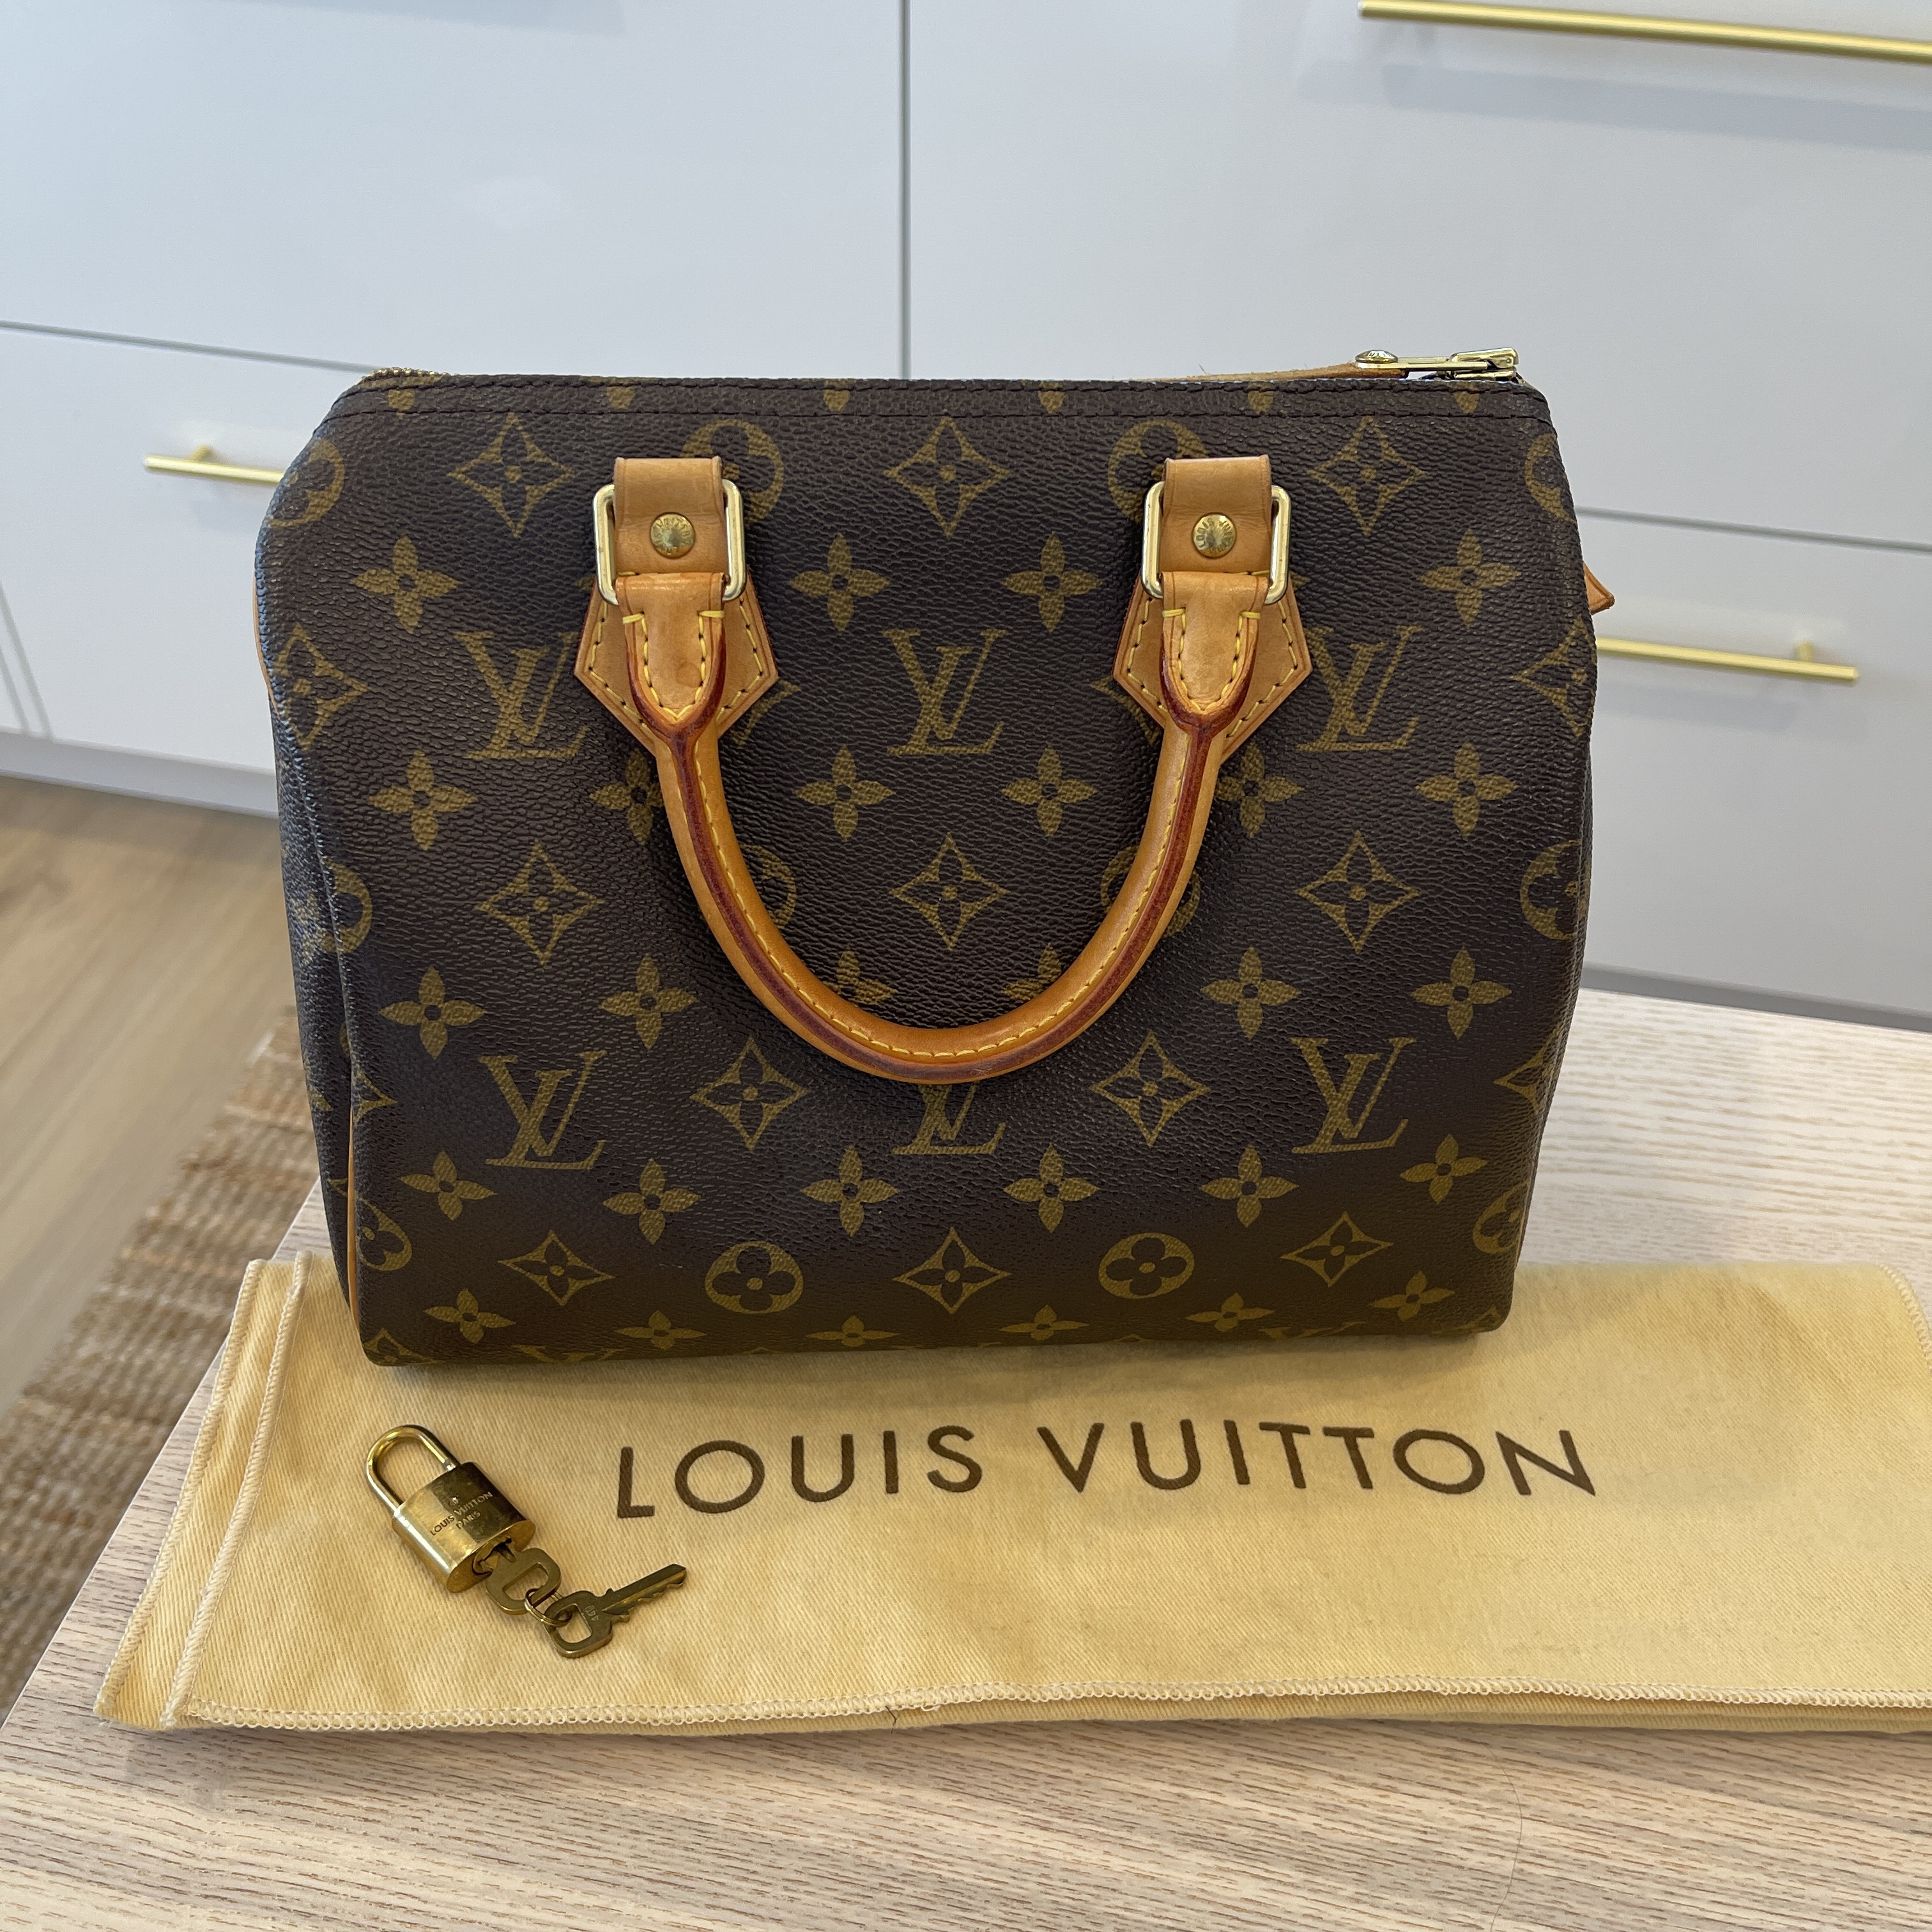 Vintage Louis Vuitton mono speedy 25 - Review and contents 